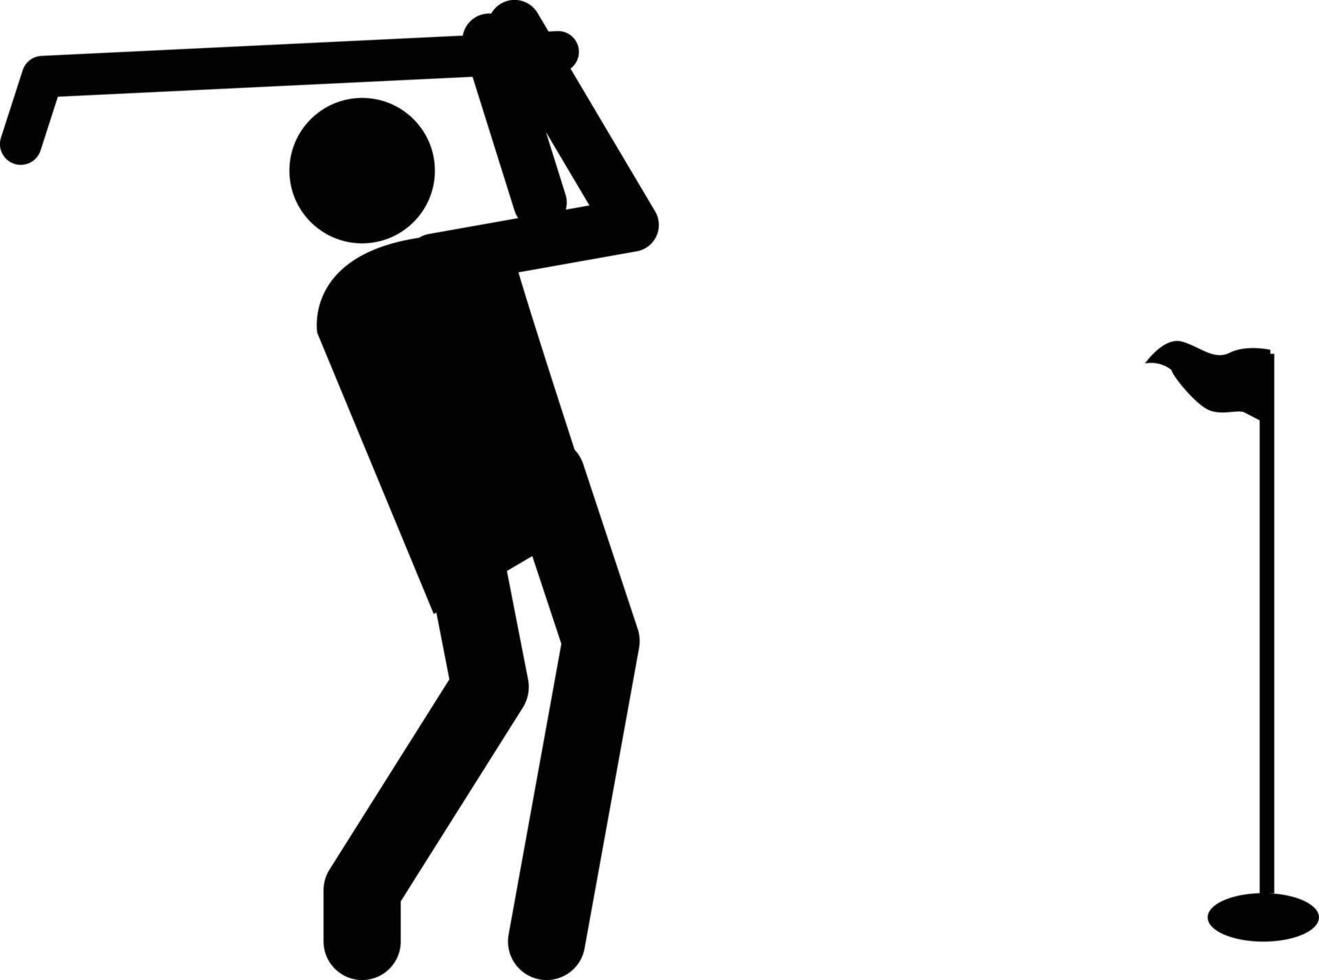 golf icon on white background. black silhouette of golf. golf player sign. flat style. vector